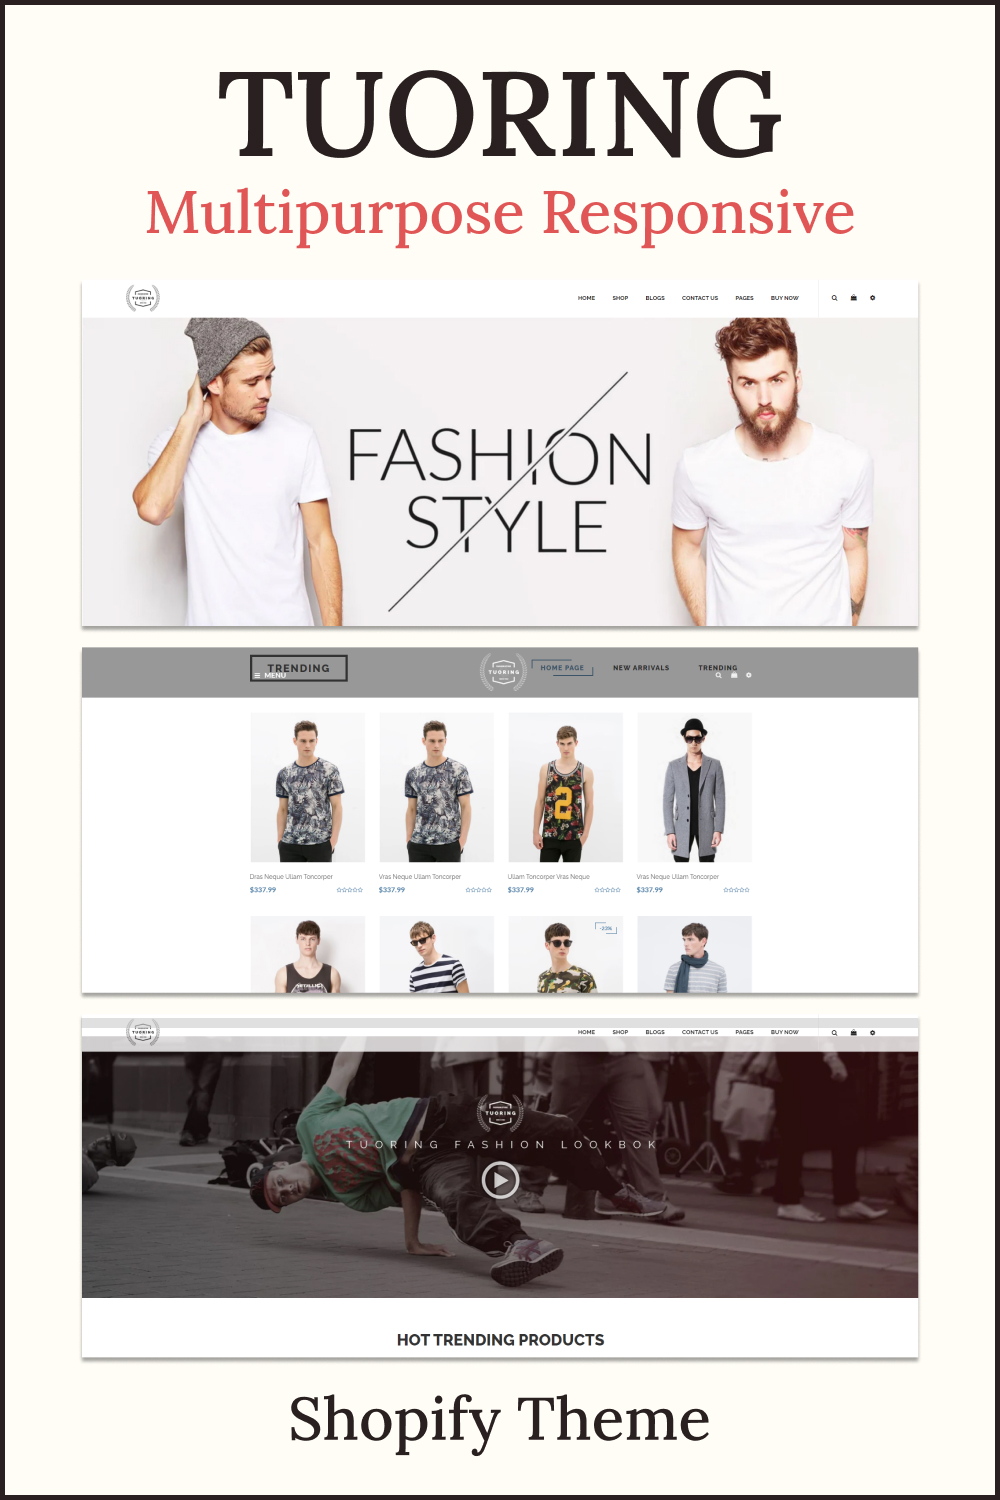 Pinterest illustrations of tuoring responsive fashion tee clothing shopify theme.